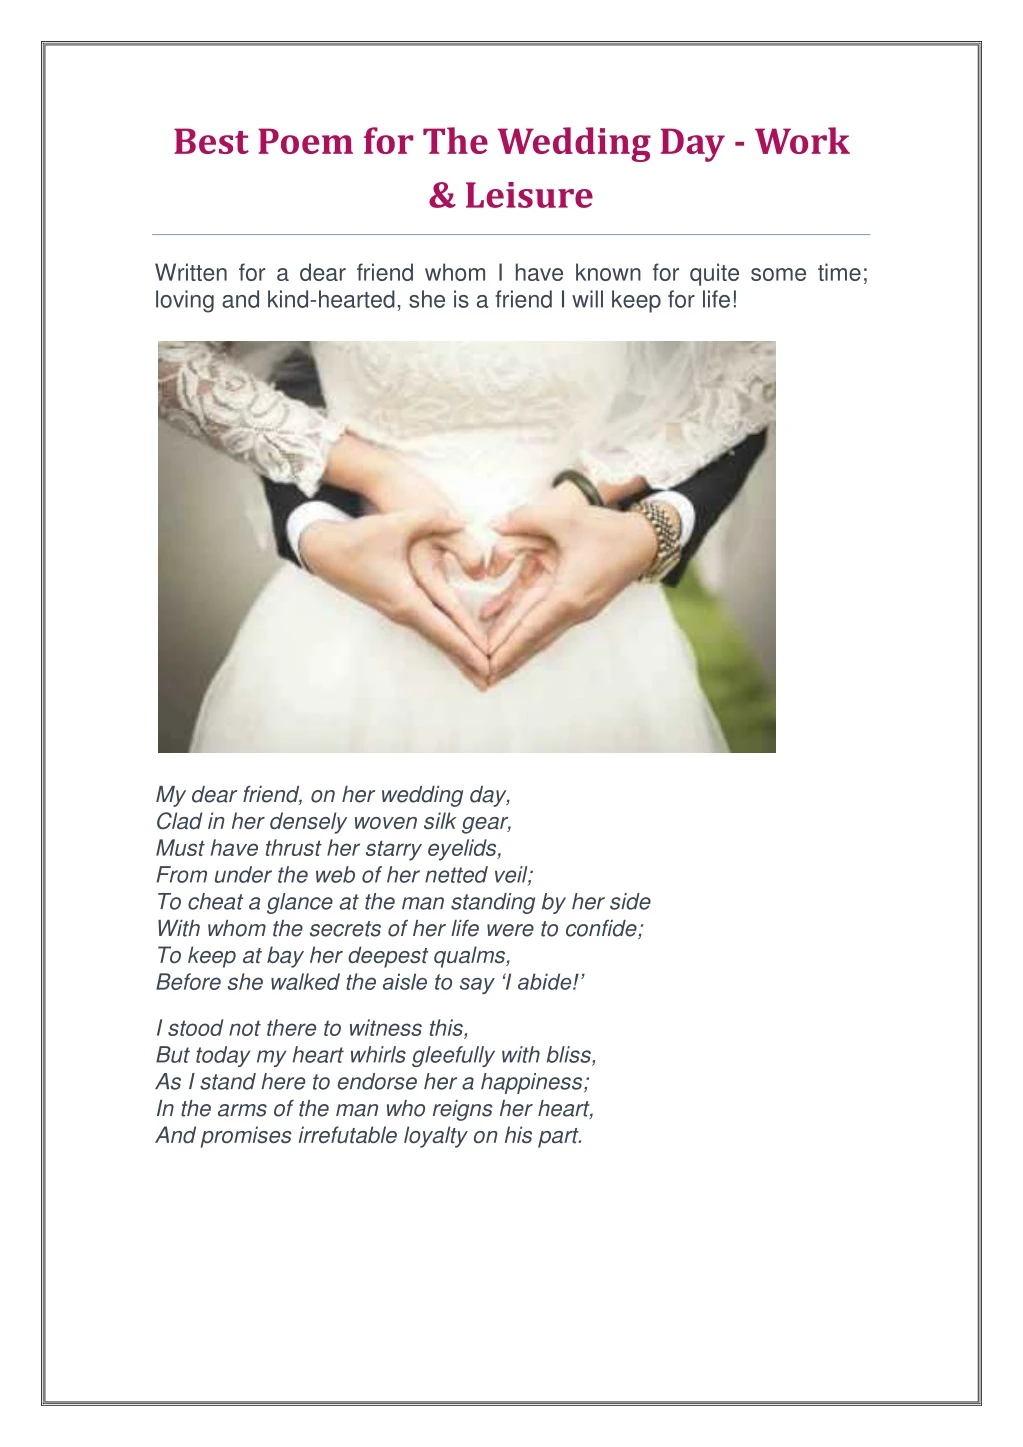 best poem for the wedding day work leisure